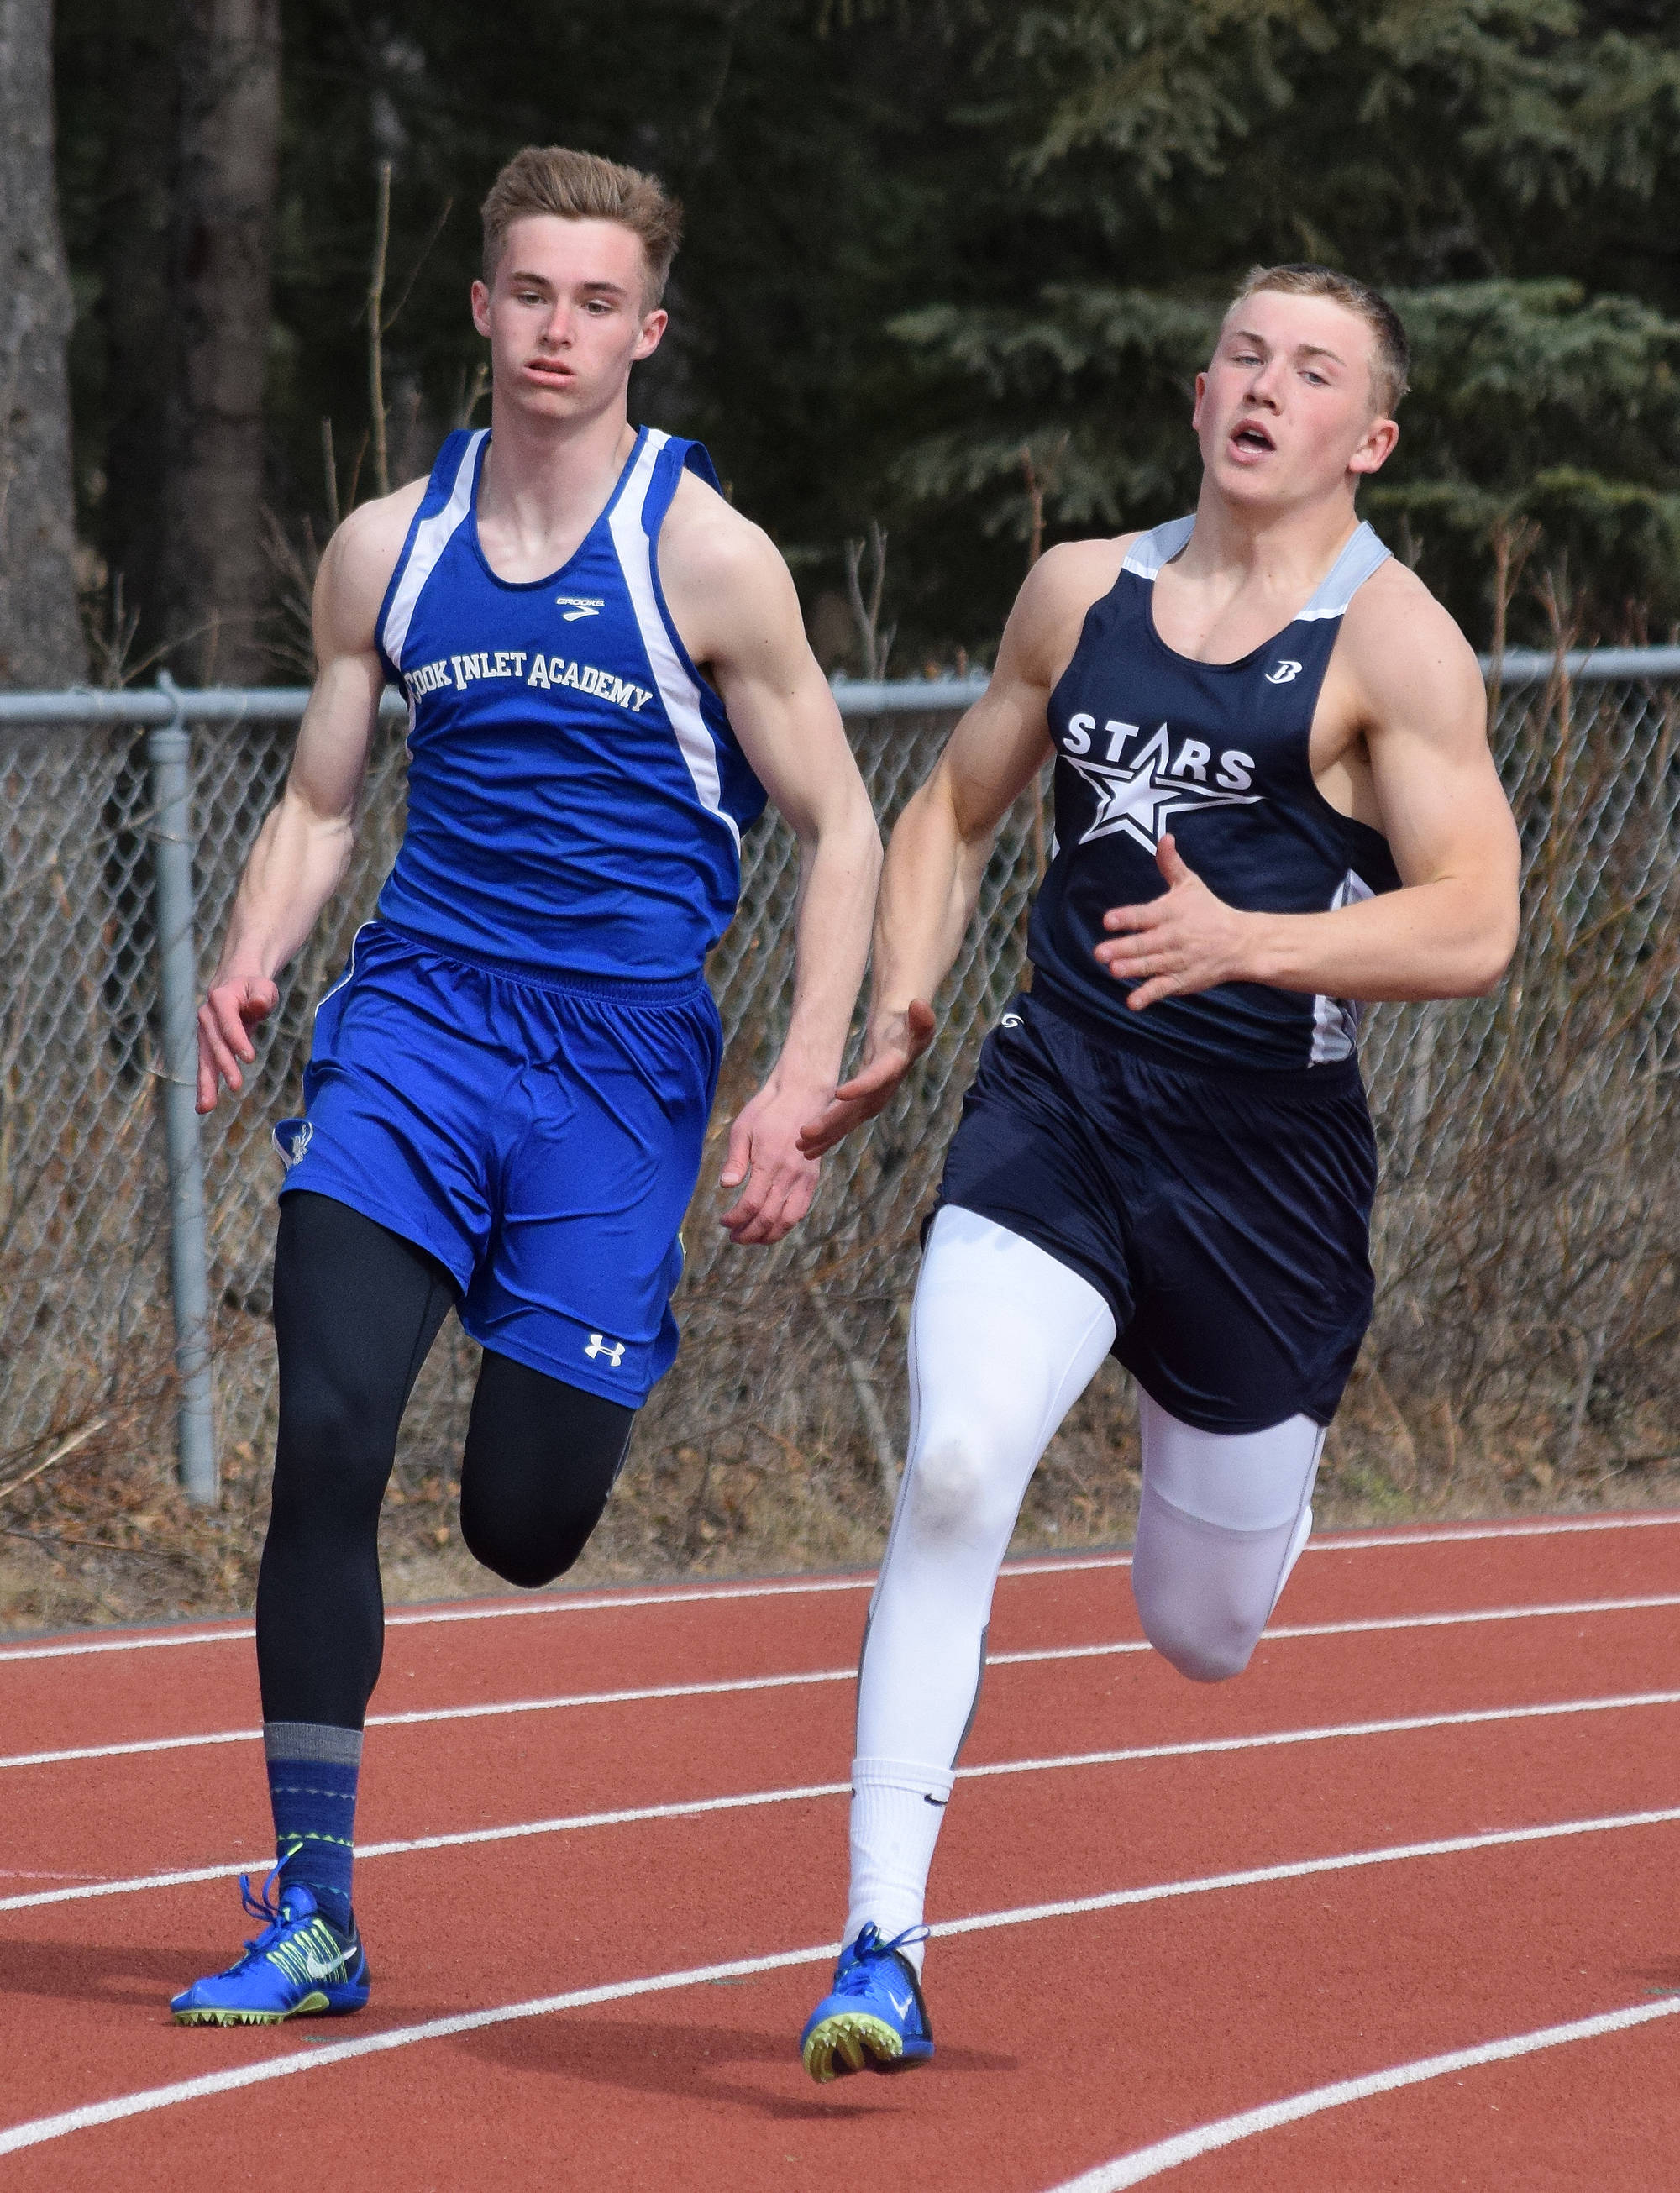 Cook Inlet Academy’s Noah Leaf (left) races Soldotna’s Brenner Furlong in Saturday’s boys 200-meter sprint at the Kenai Invitational at Ed Hollier Field in Kenai. (Photo by Joey Klecka/Peninsula Clarion)